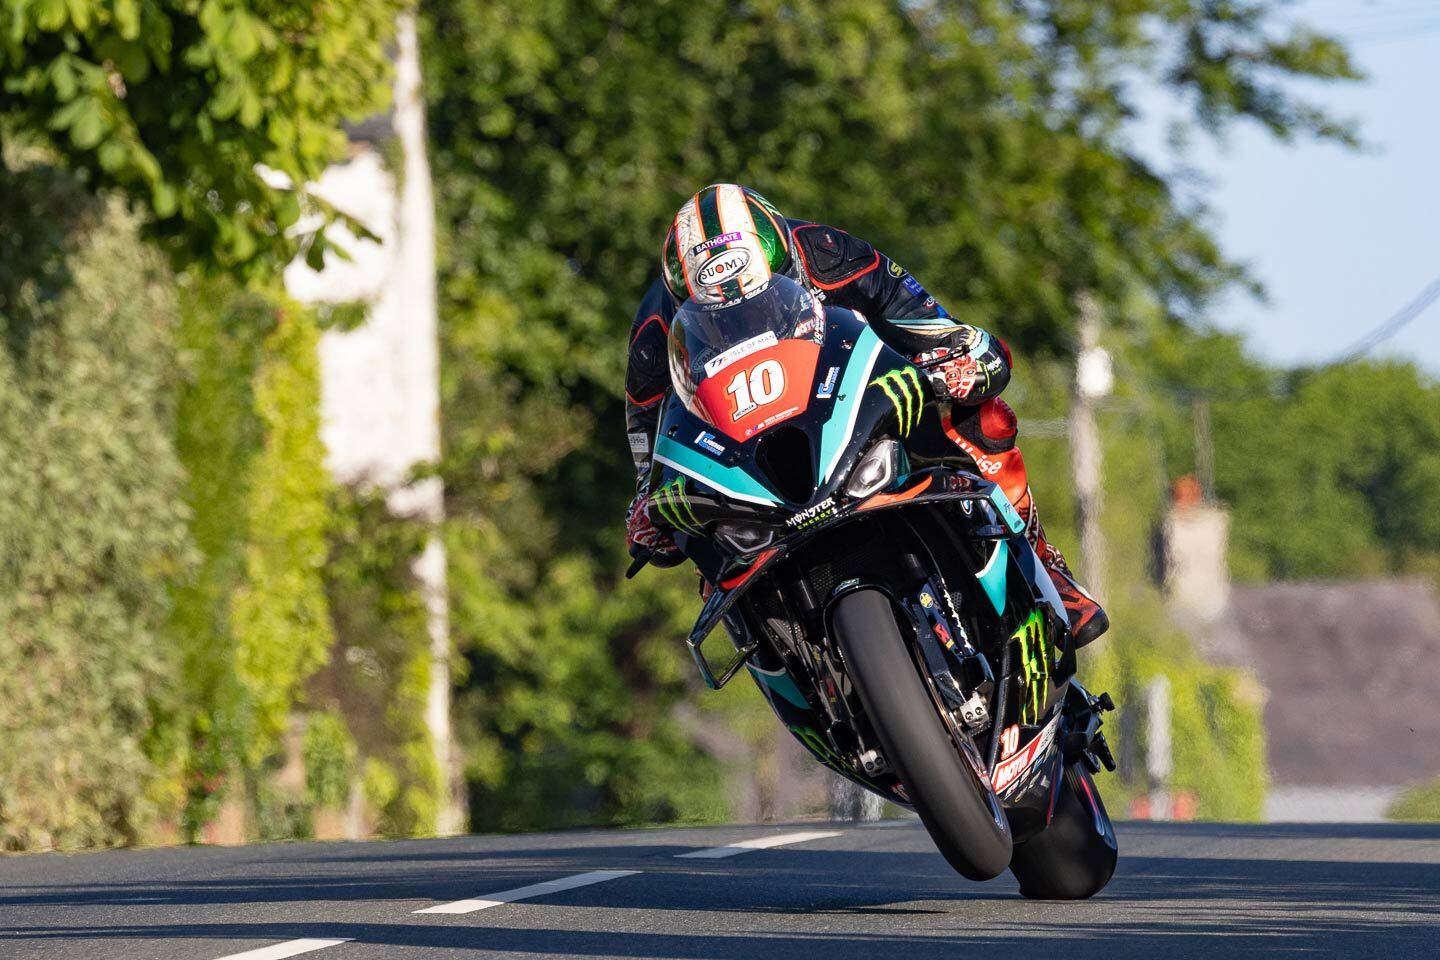 The BMW RR has been Peter Hickman’s go-to bike, upon which he held the course record. Here he launches off Ballagarey, a blind dogleg to the right, riding the new M 1000 RR Superstock, exceeding the 130 mph in the early practice sessions.